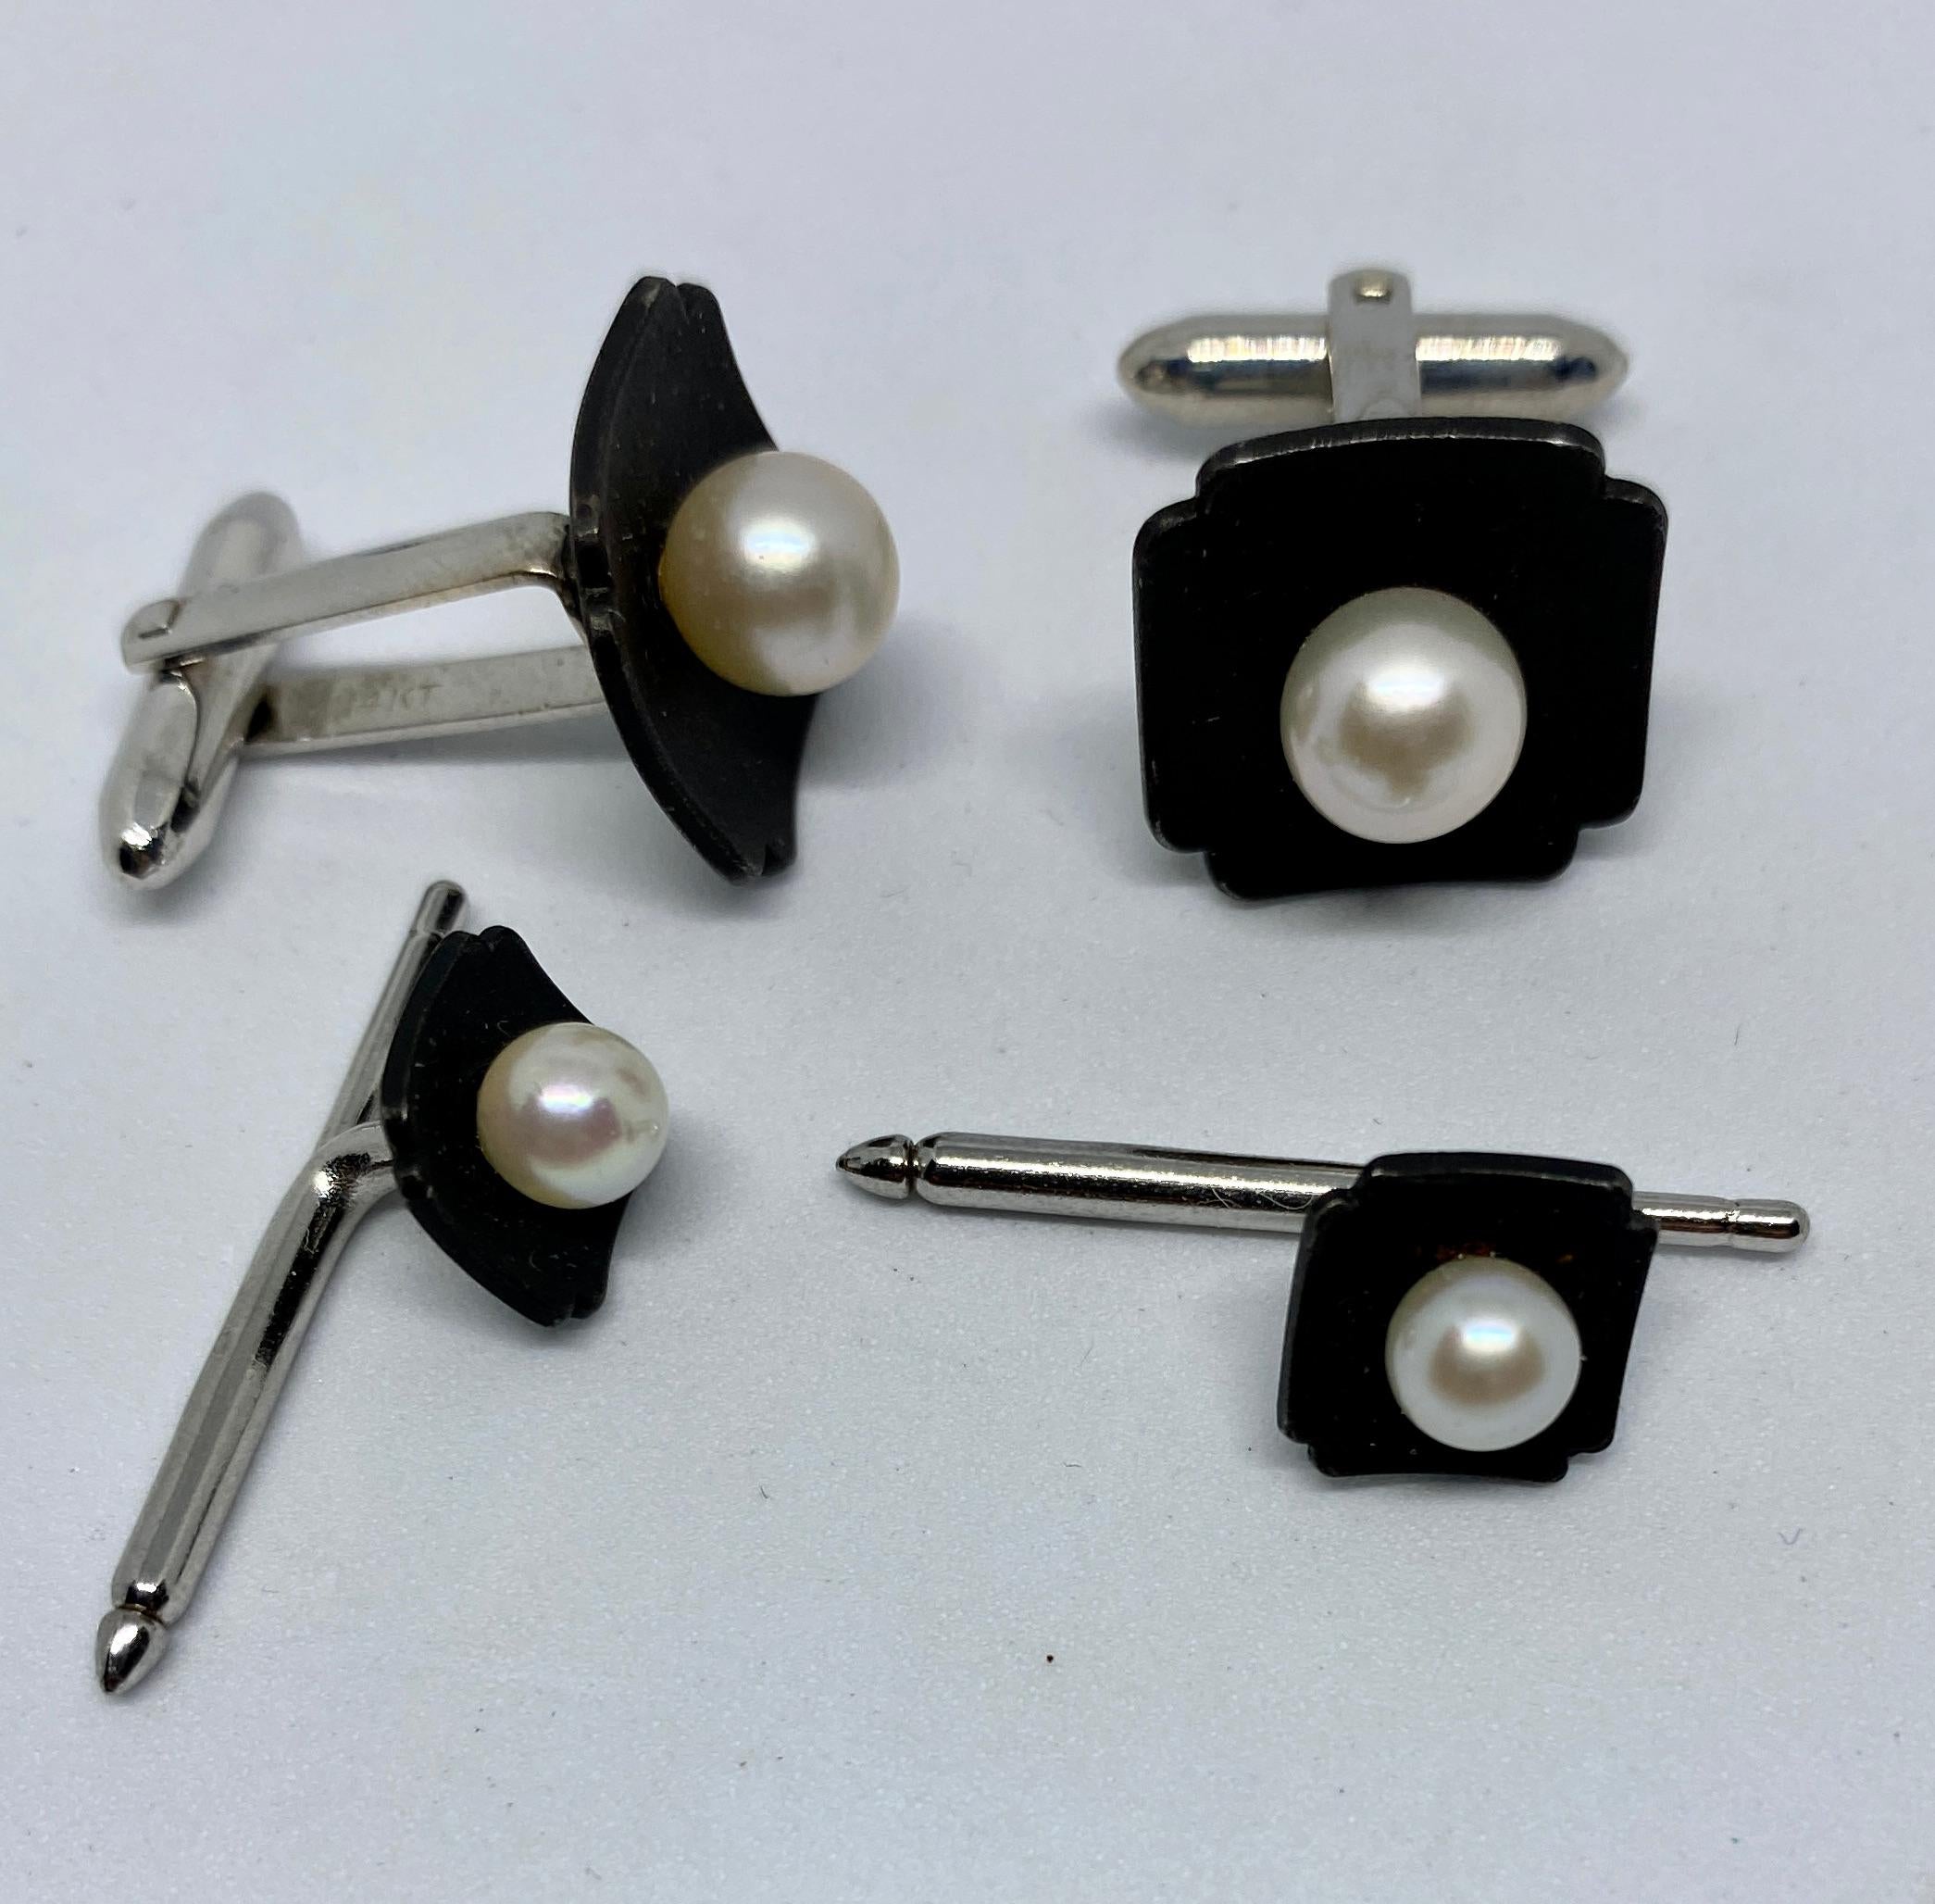 Beautiful, original and highly collectible G.T. Marsh & Company dress set comprised of cufflinks and two matching shirt studs in oxidized steel with round, white cultured pearls and 14K white gold fittings. Note that this set is very similar to